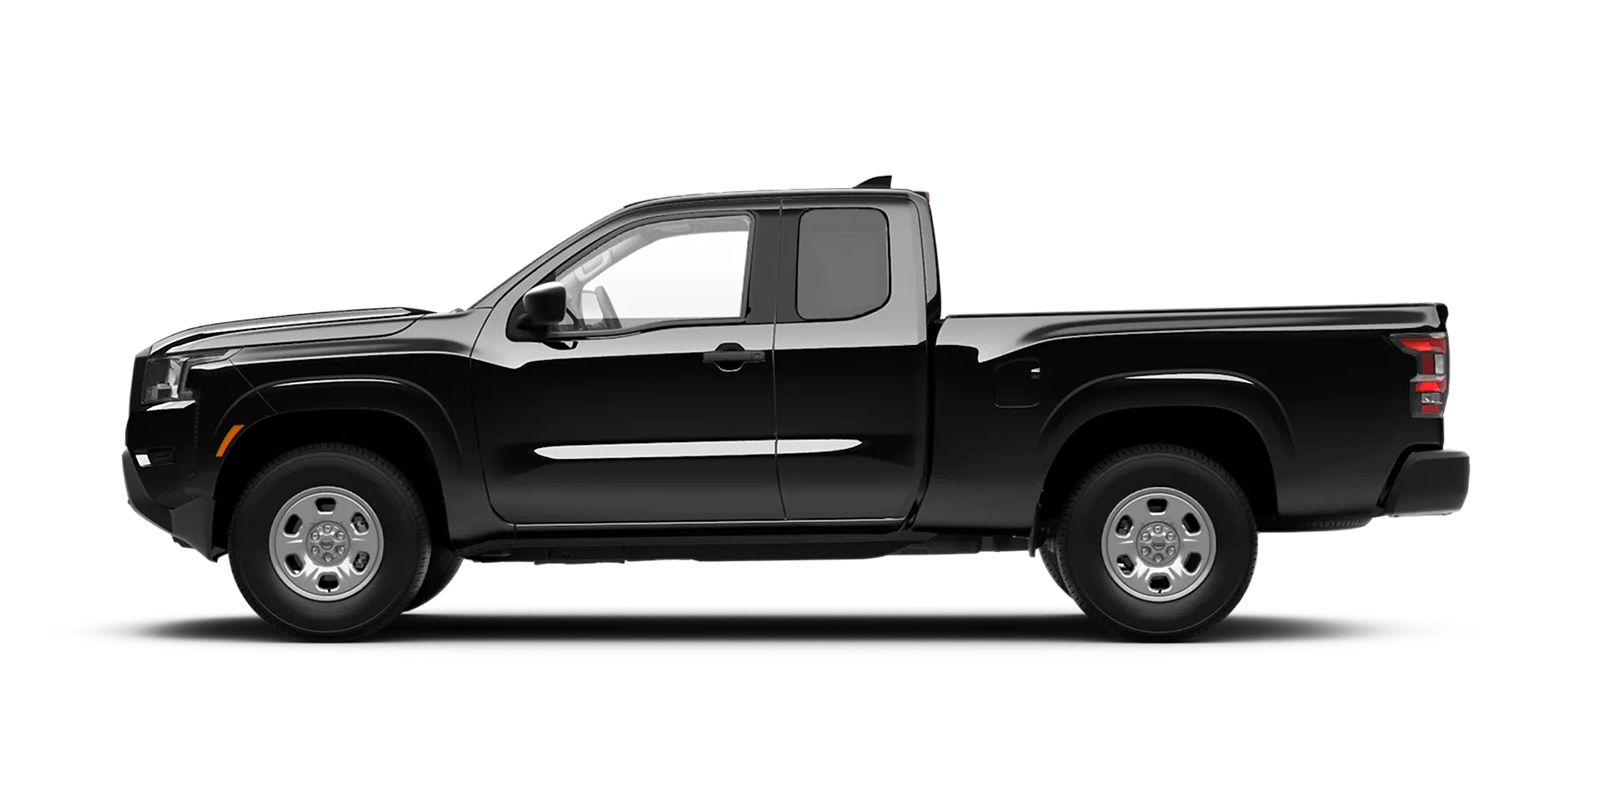 2022 Frontier King Cab S 4x2 in Super Black | San Leandro Nissan in San Leandro CA